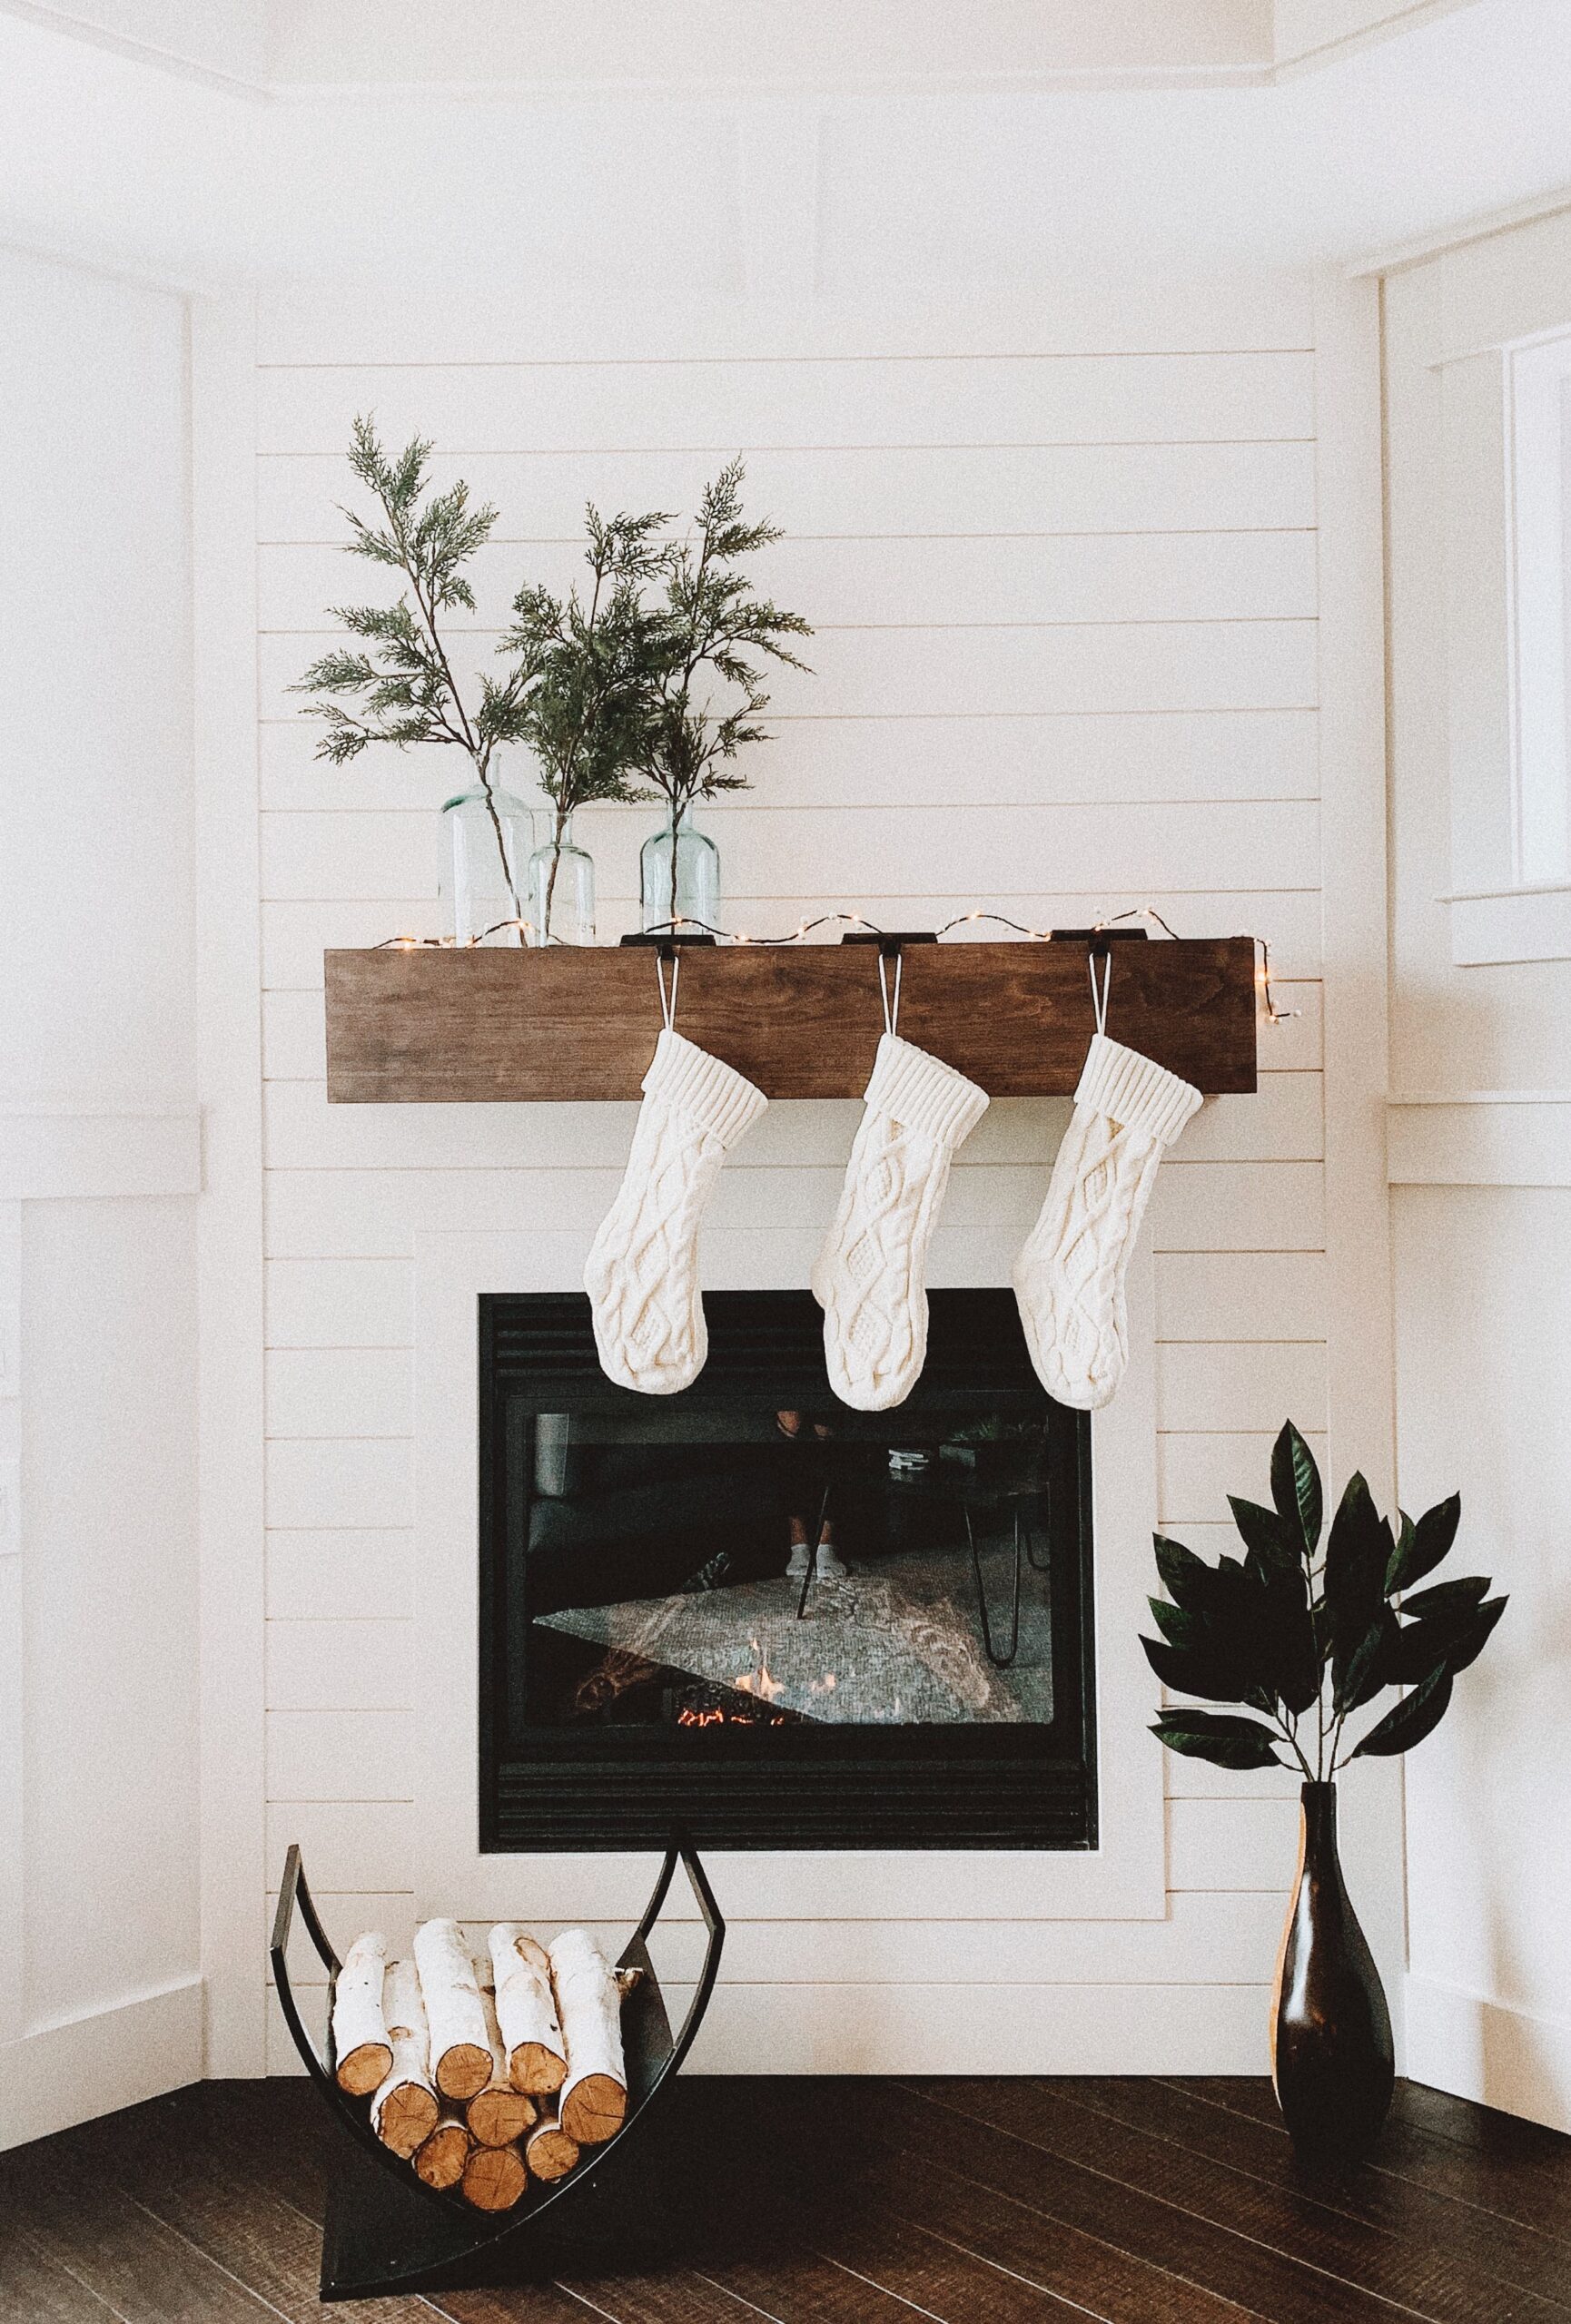 Image of a white wall featuring a wooden mantle and a black fireplace. On the mantle there is greenery and three white stockings. There is white firewood below the fireplace.